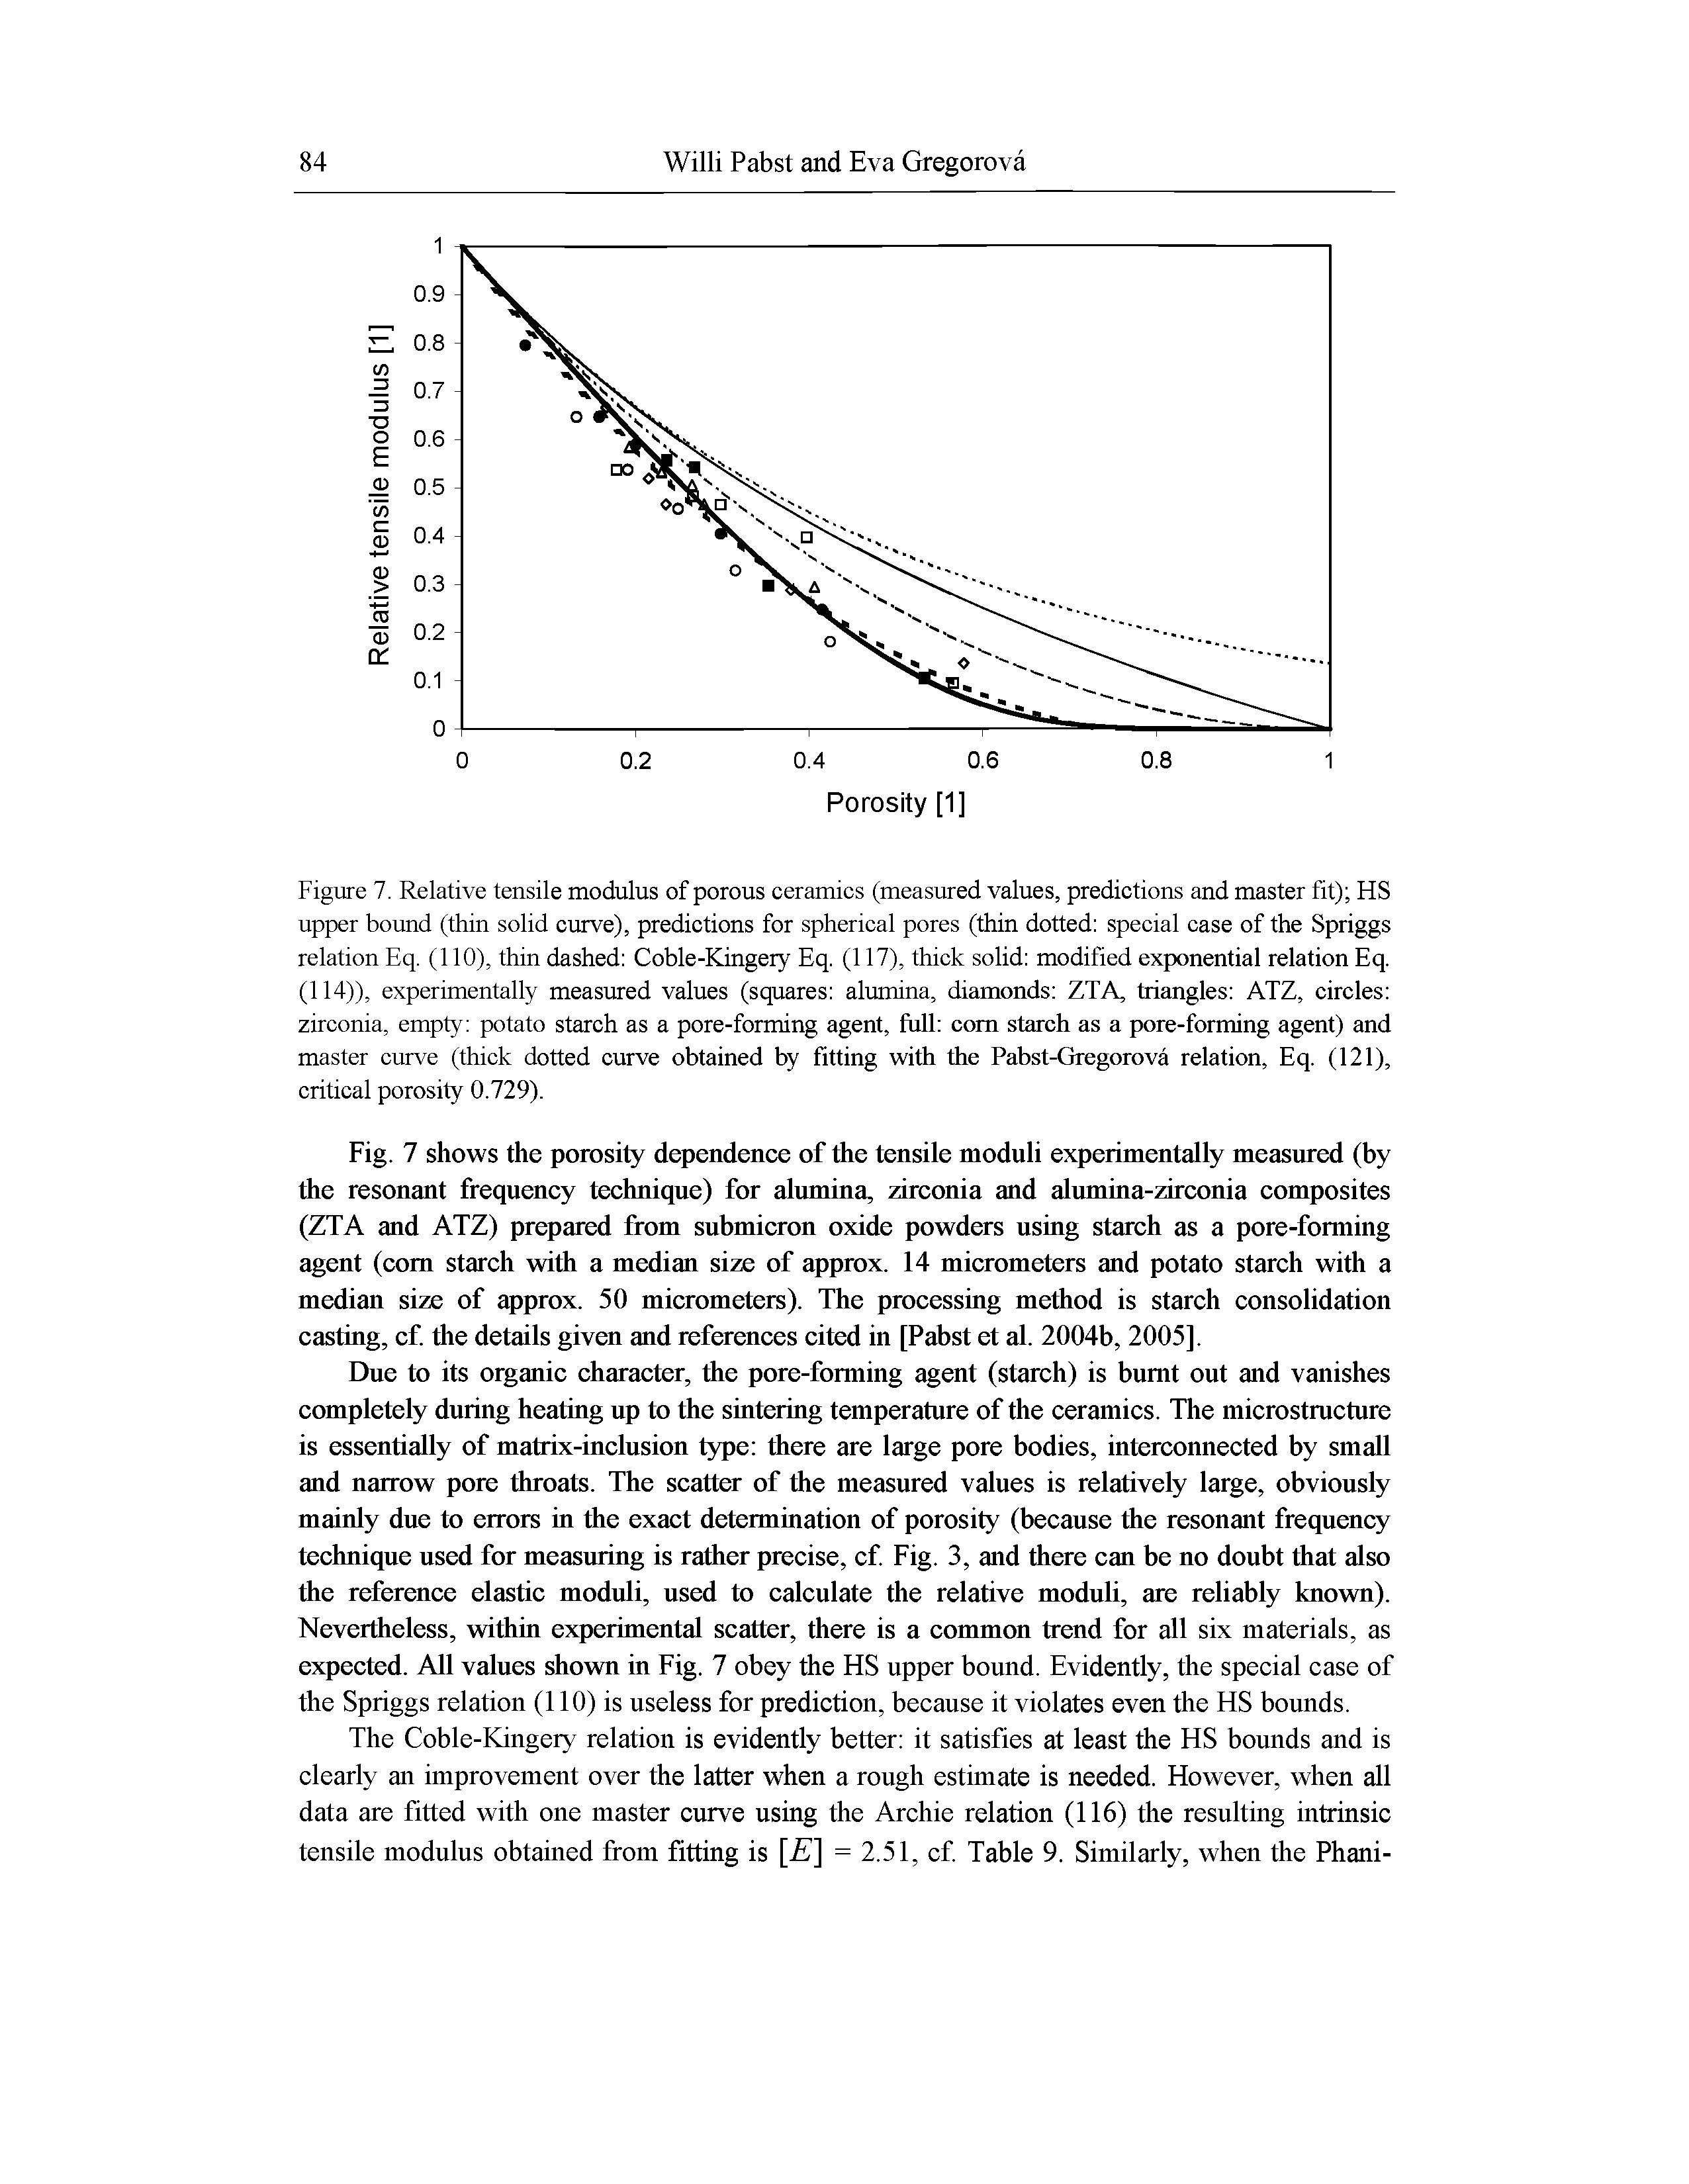 Figure 7. Relative tensile modulus of porous ceramics (measured values, predictions and master fit) HS upper bound (thin solid curve), predictions for spherical pores (thin dotted special case of the Spriggs relation Eq. (110), thin dashed Coble-Kingeiy Eq. (117), thick solid modified exponential relation Eq. (114)), experimentally measured values (squares alumina, diamonds ZTA, triangles ATZ, circles zirconia, empty potato starch as a pore-forming agent, full com starch as a pore-forming agent) and master curve (thick dotted curve obtained by fitting with the Pabst-Gregorova relation, Eq. (121), critical porosity 0.729).